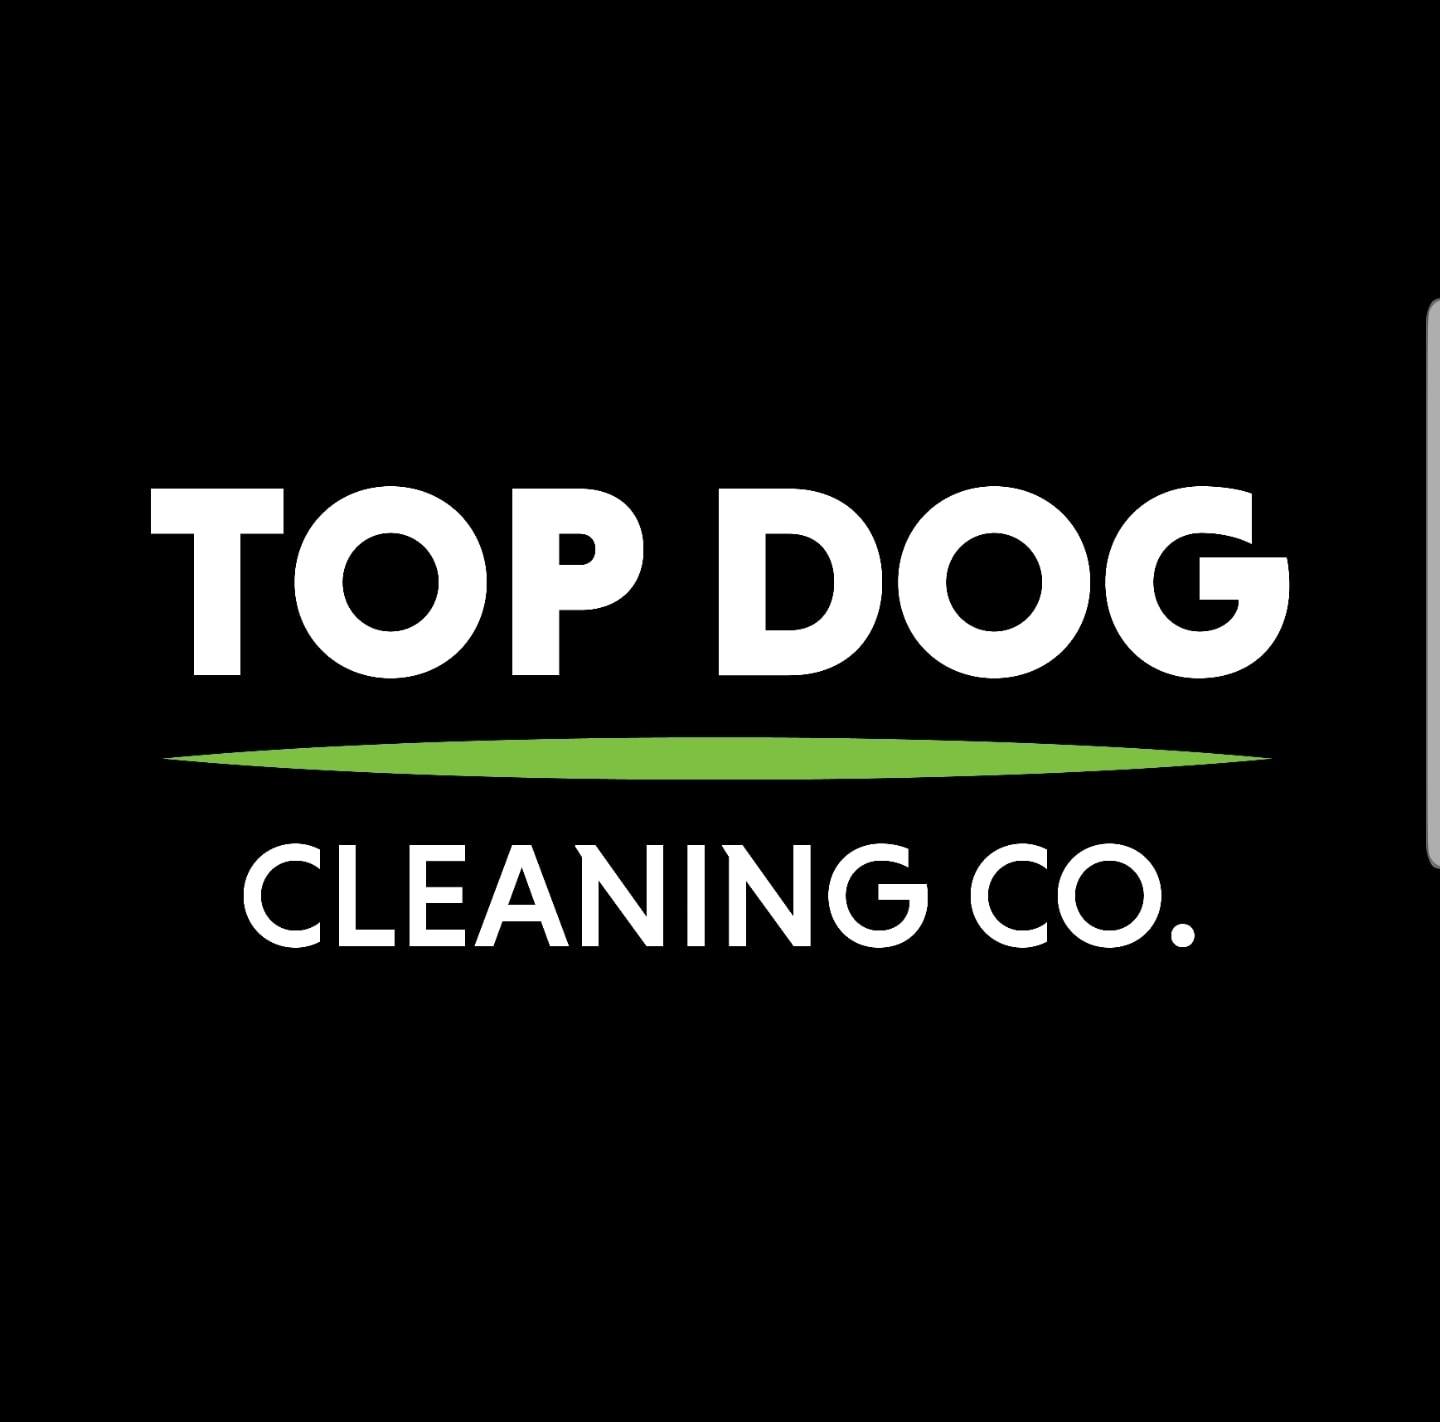 Top Dog Cleaning Co.